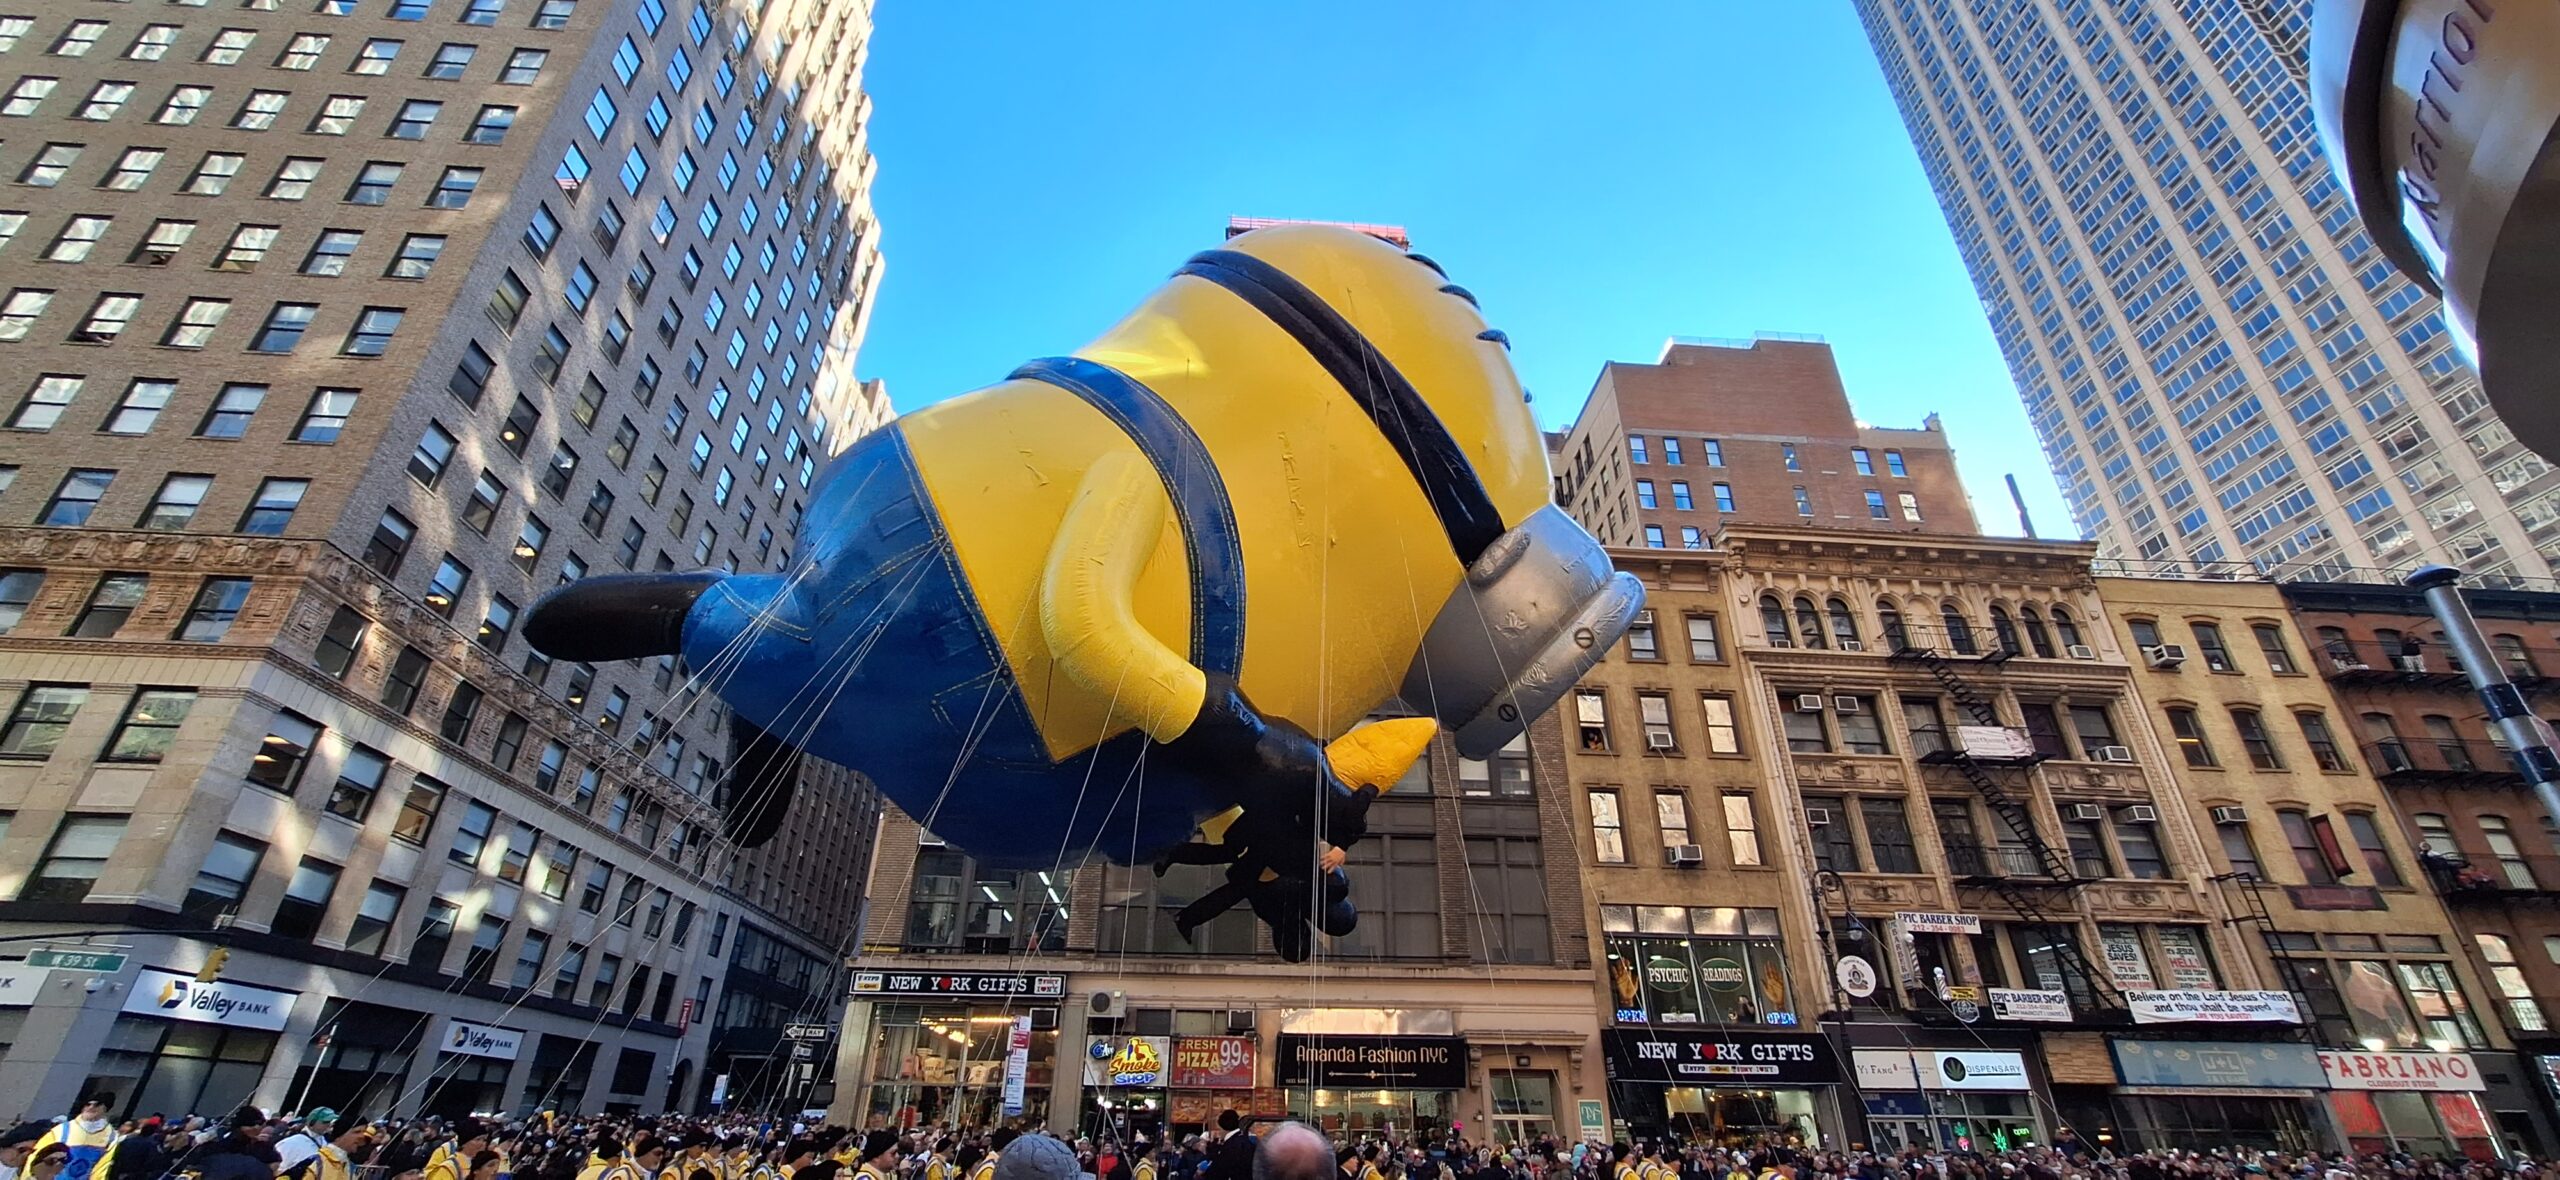 a large yellow and blue balloon in a city